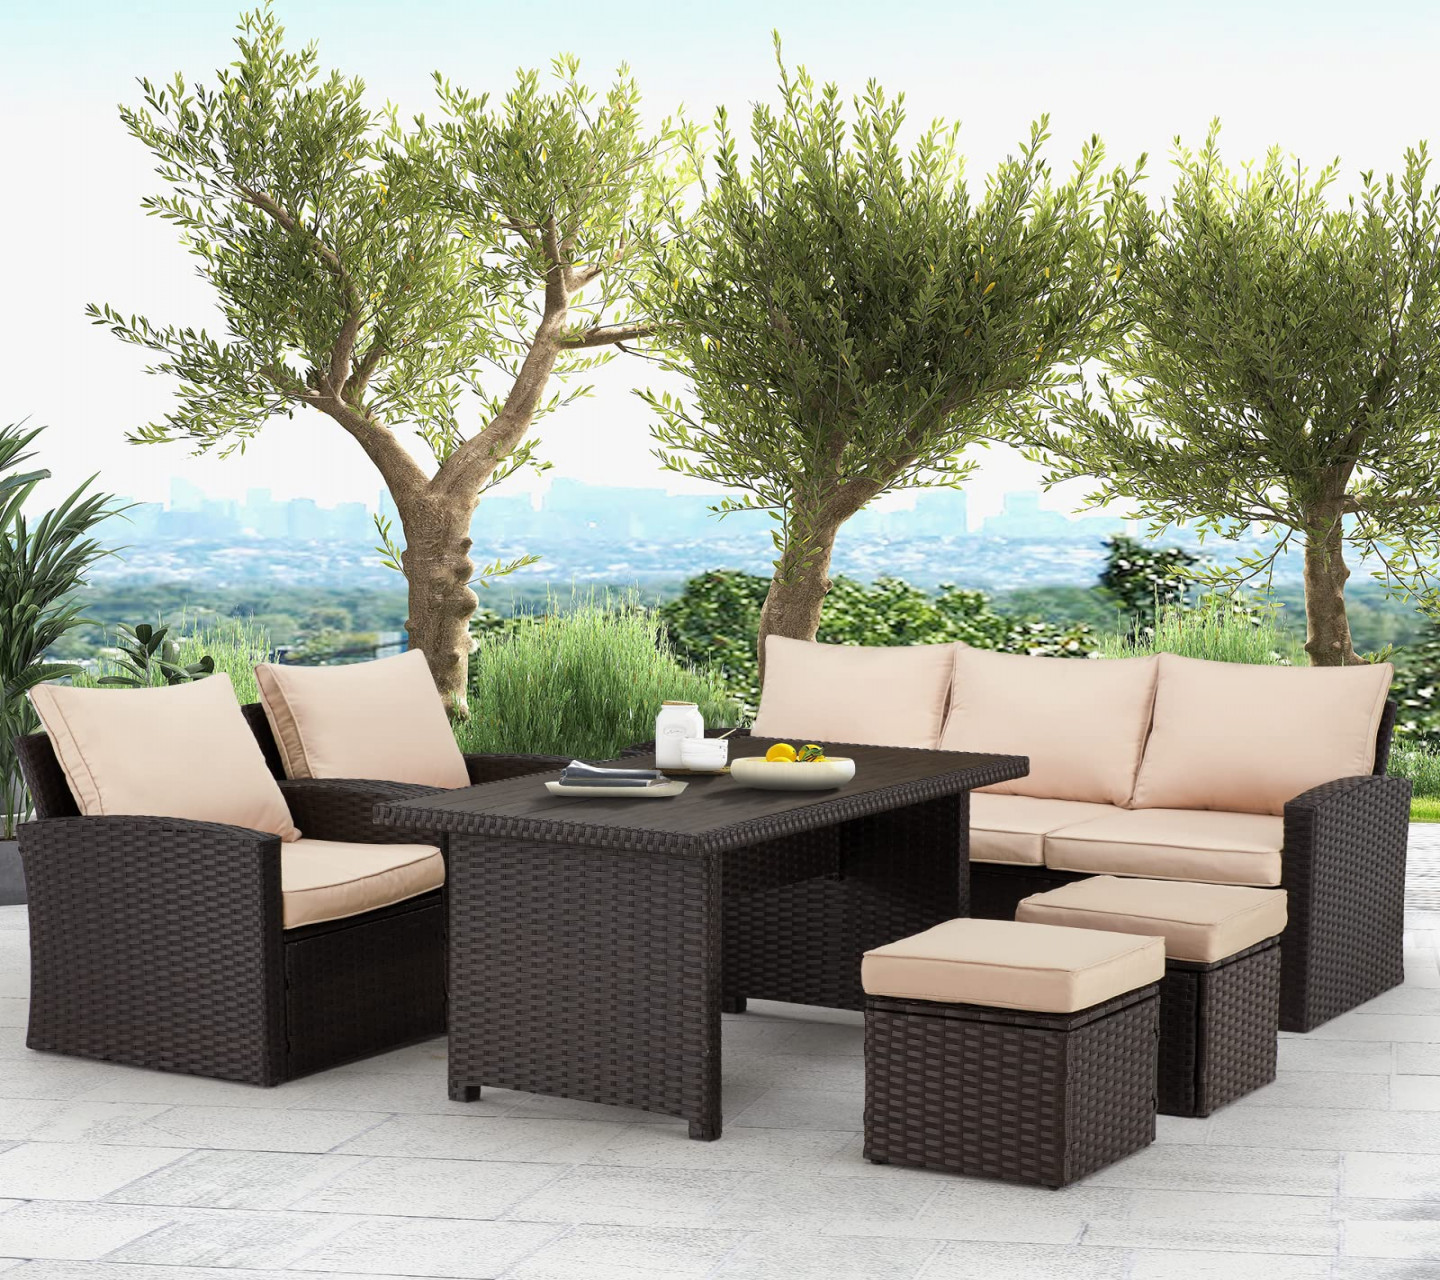 HOMREST  Pieces Patio Furniture Sets Clearance, Patio Dining Sofa Set  Outdoor Sectional Sofa Conversation Set All Weather Wicker Rattan Couch  Dining